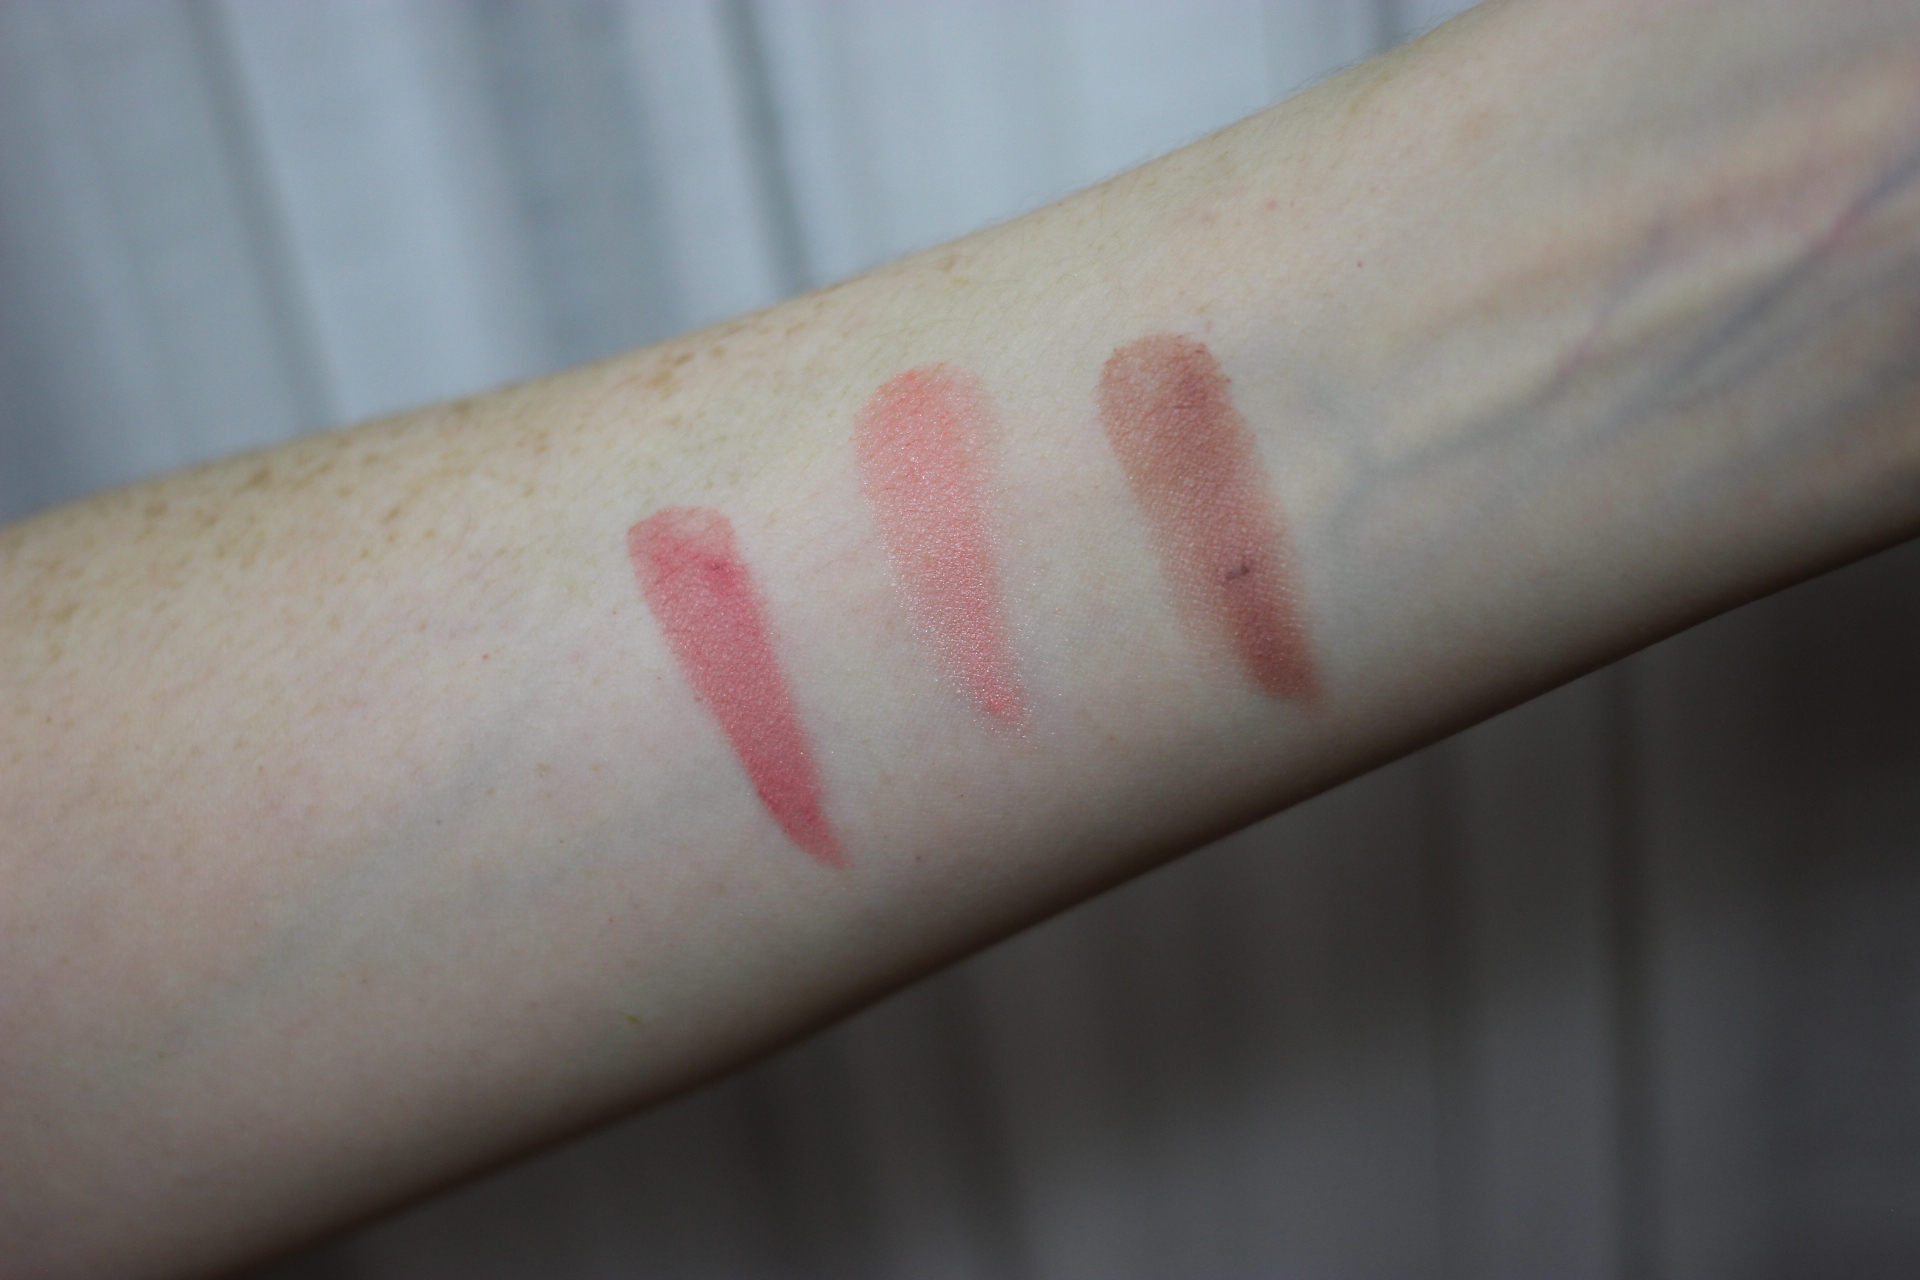 Hourglass ambient lighting blush swatches